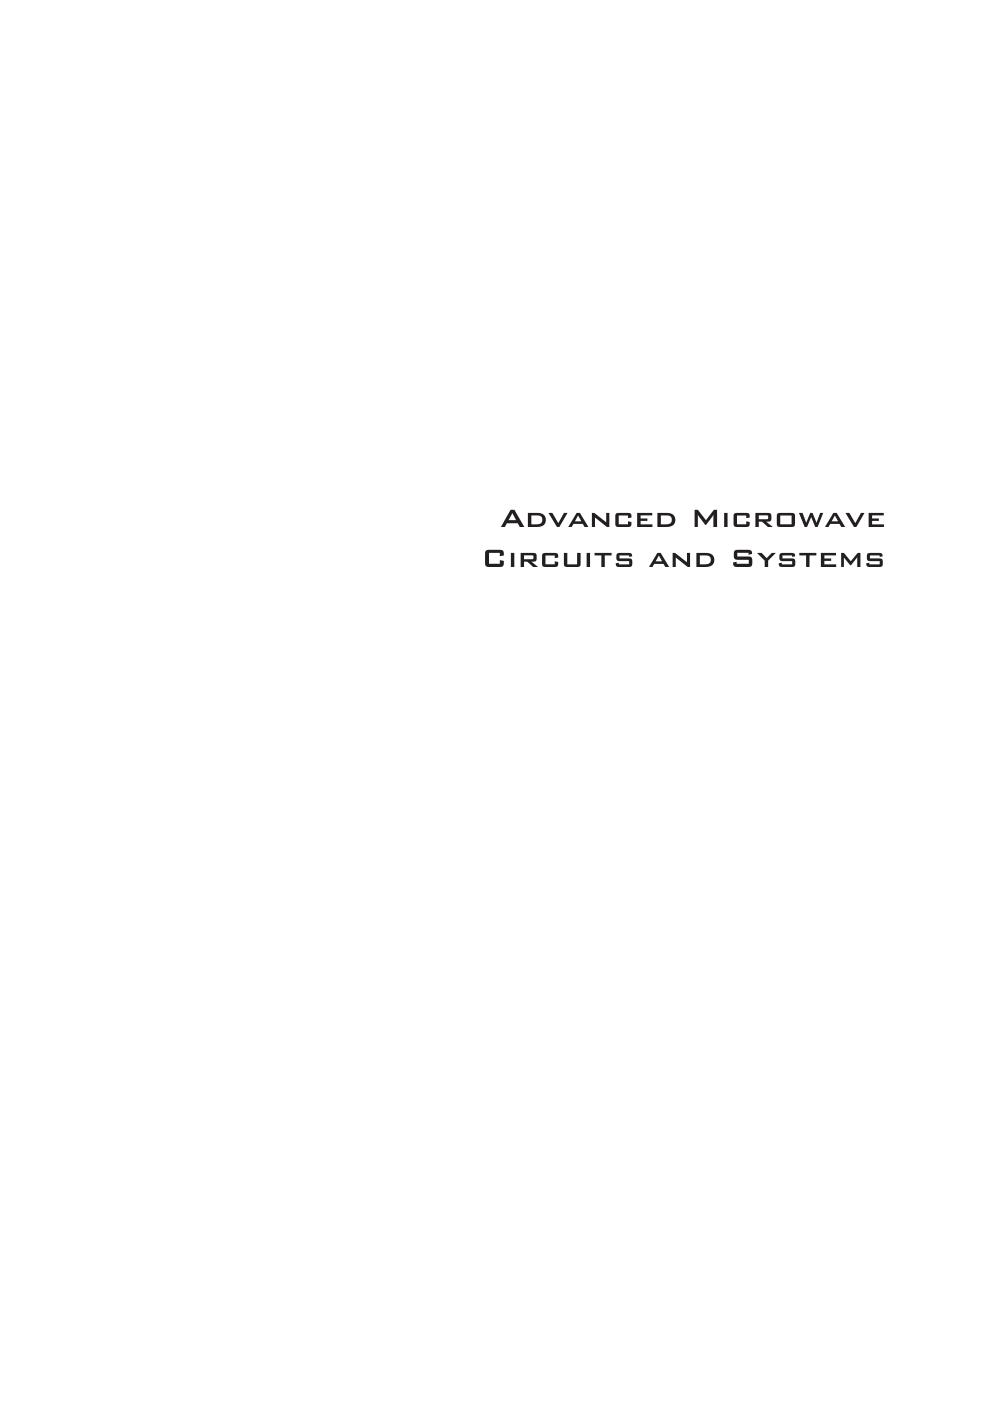 Advanced Microwave Circuits and Systems 2010.pdf